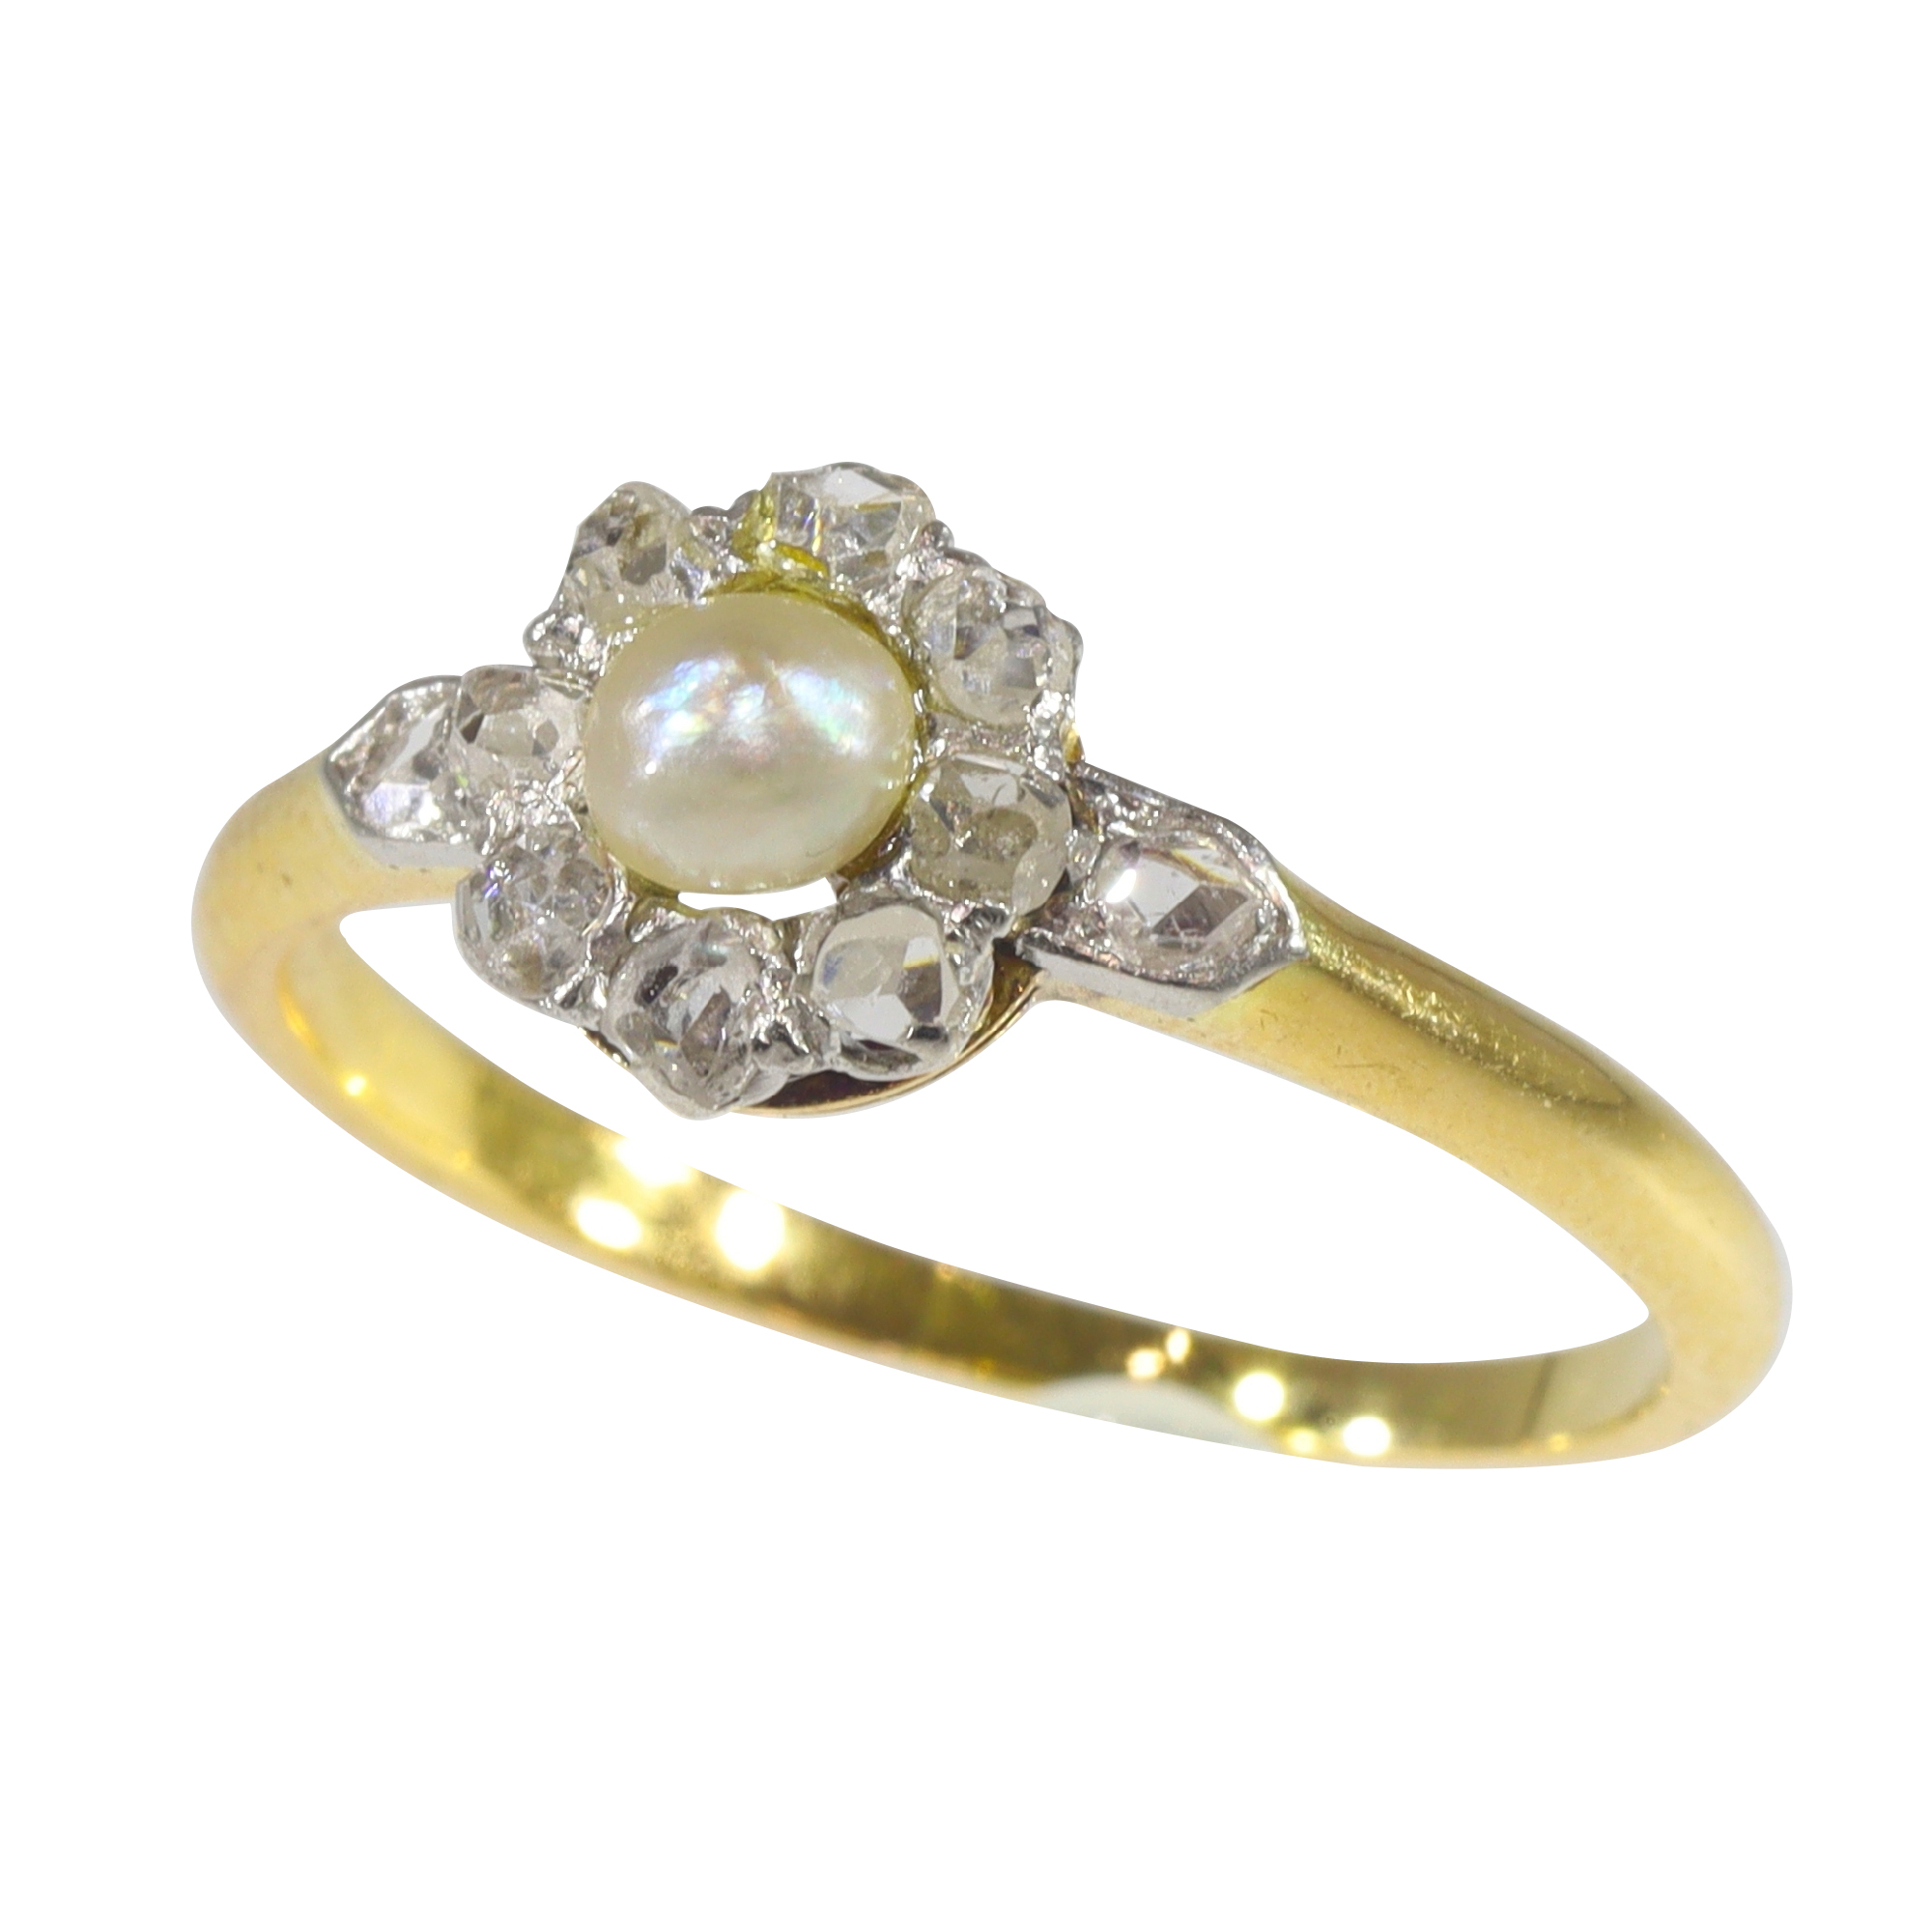 Golden Age Romance: Vintage 1900's Pearl Engagement Ring